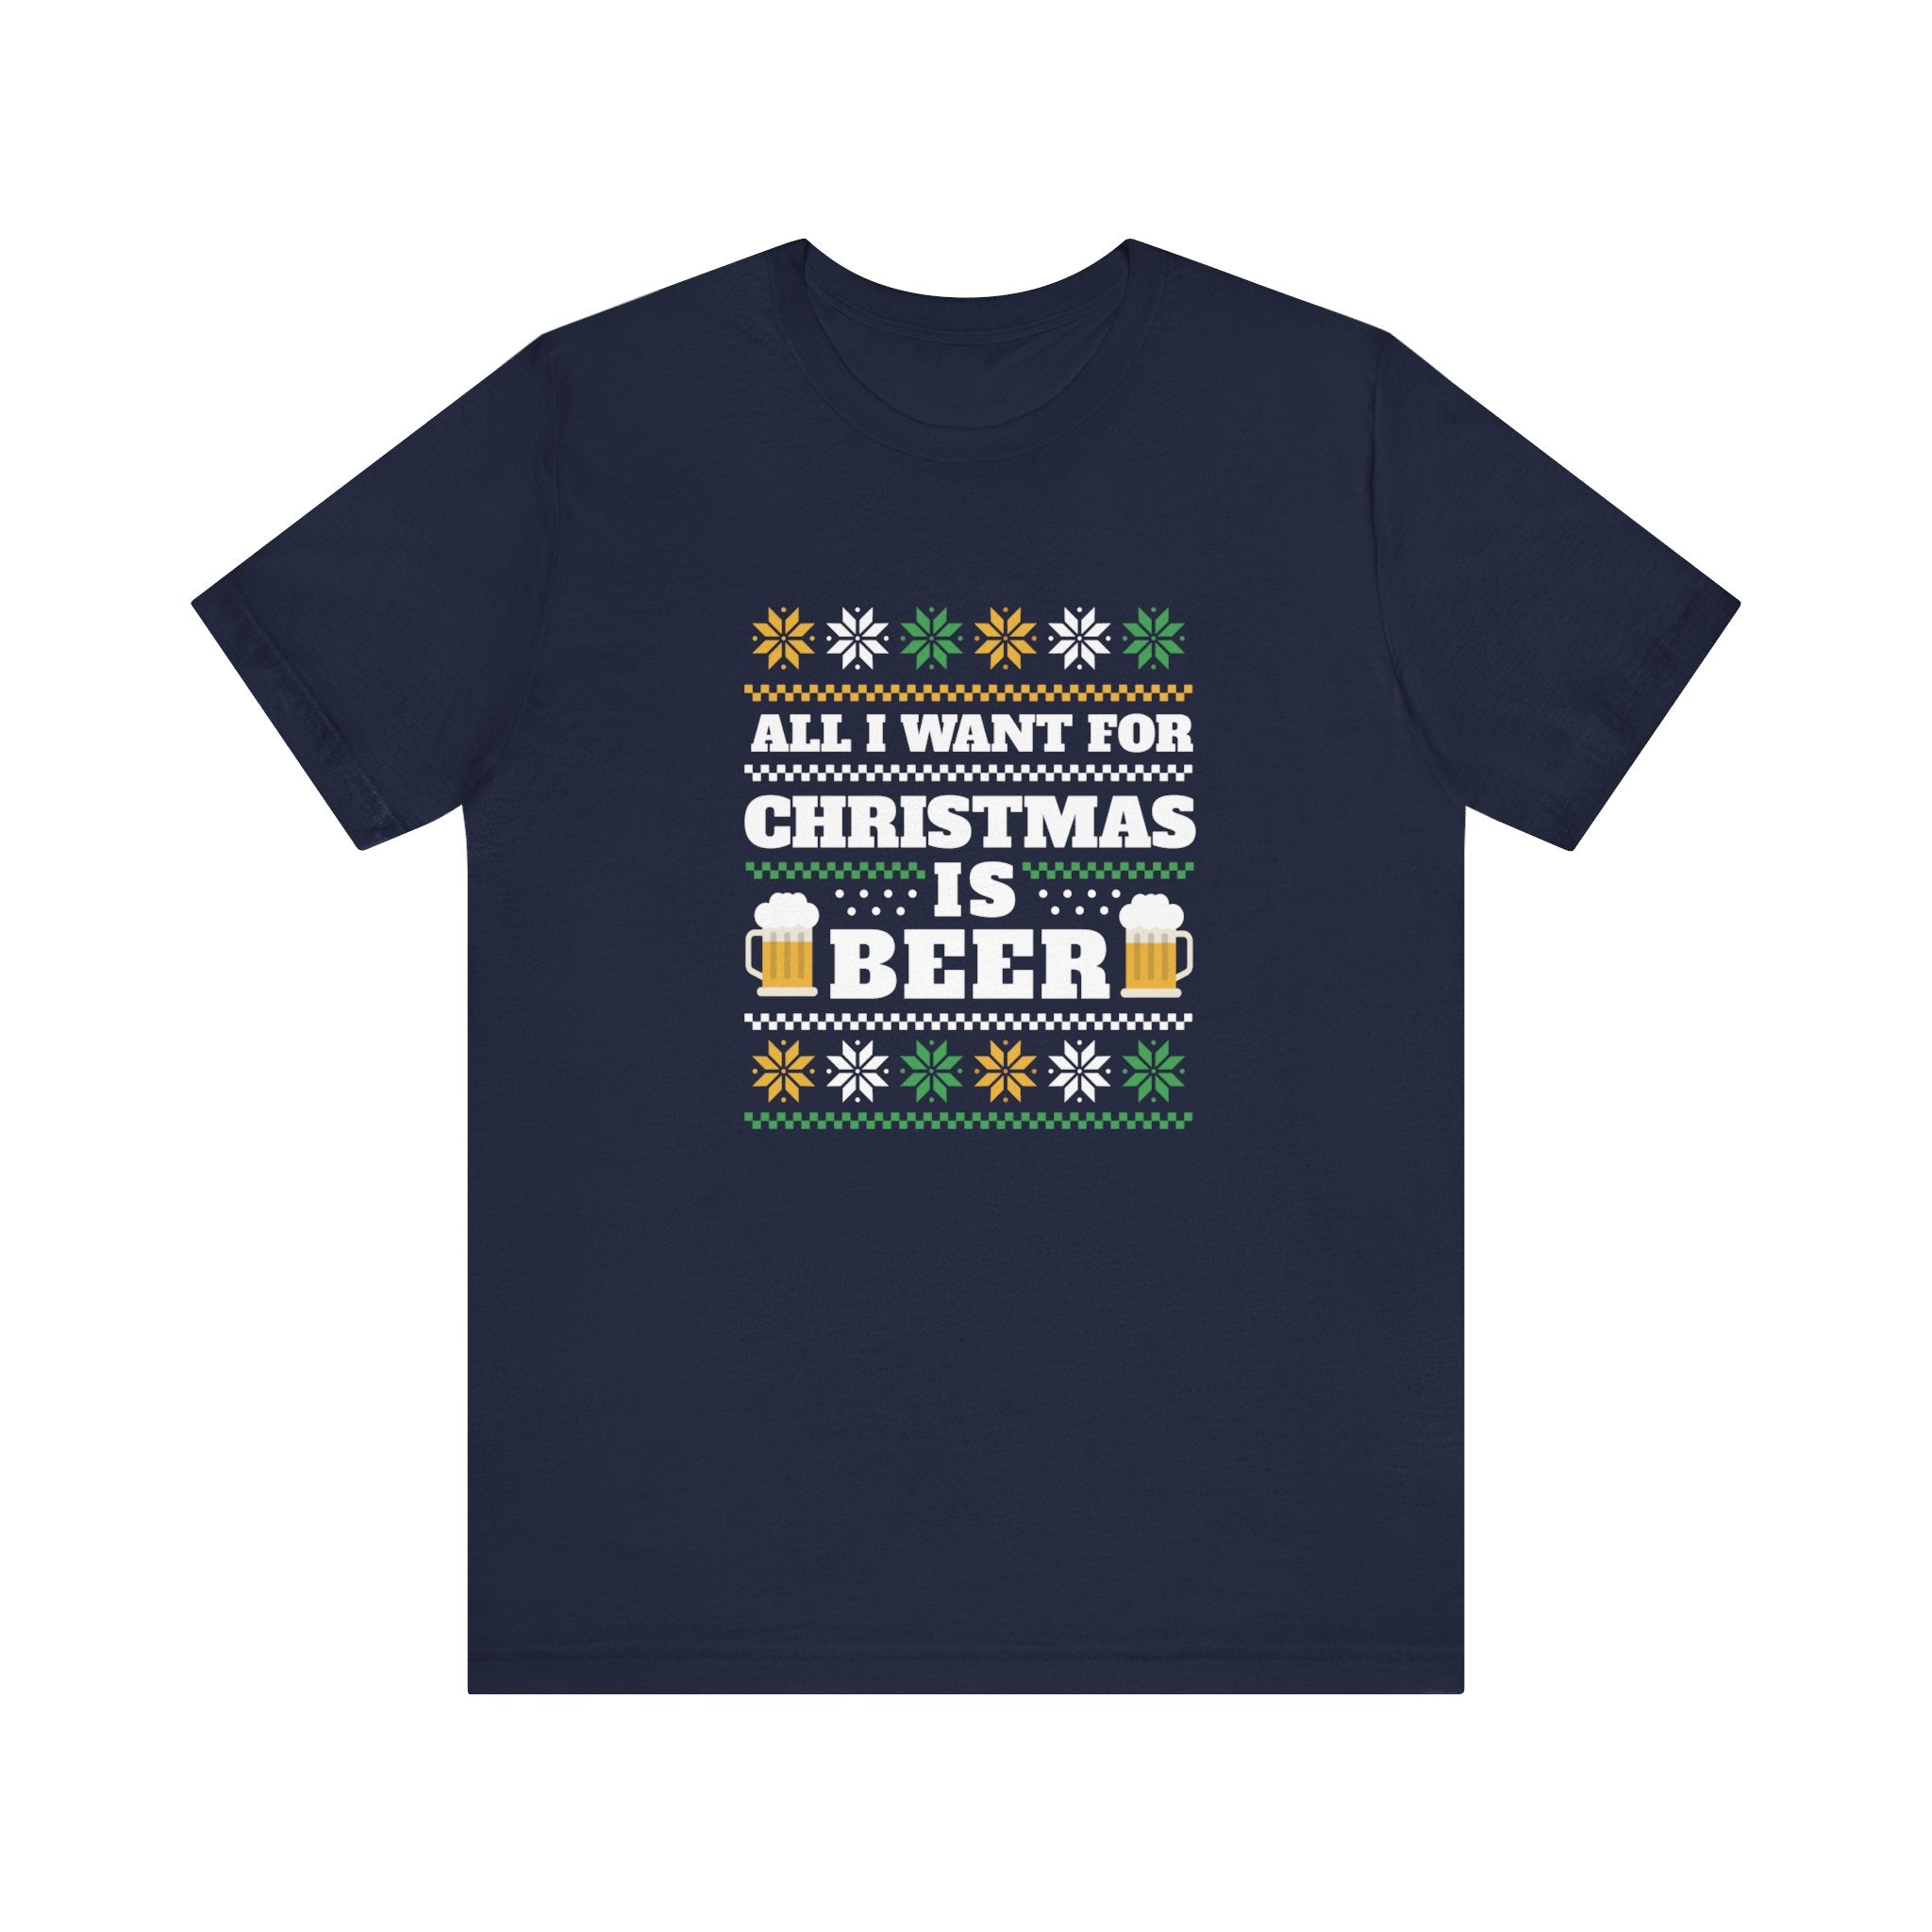 A navy blue cotton T-shirt features the text "All I Want For Christmas Is Beer" in white and yellow, decorated with beer mugs, snowflakes, and a festive pattern reminiscent of a classic Beer Ugly Sweater - T-Shirt.